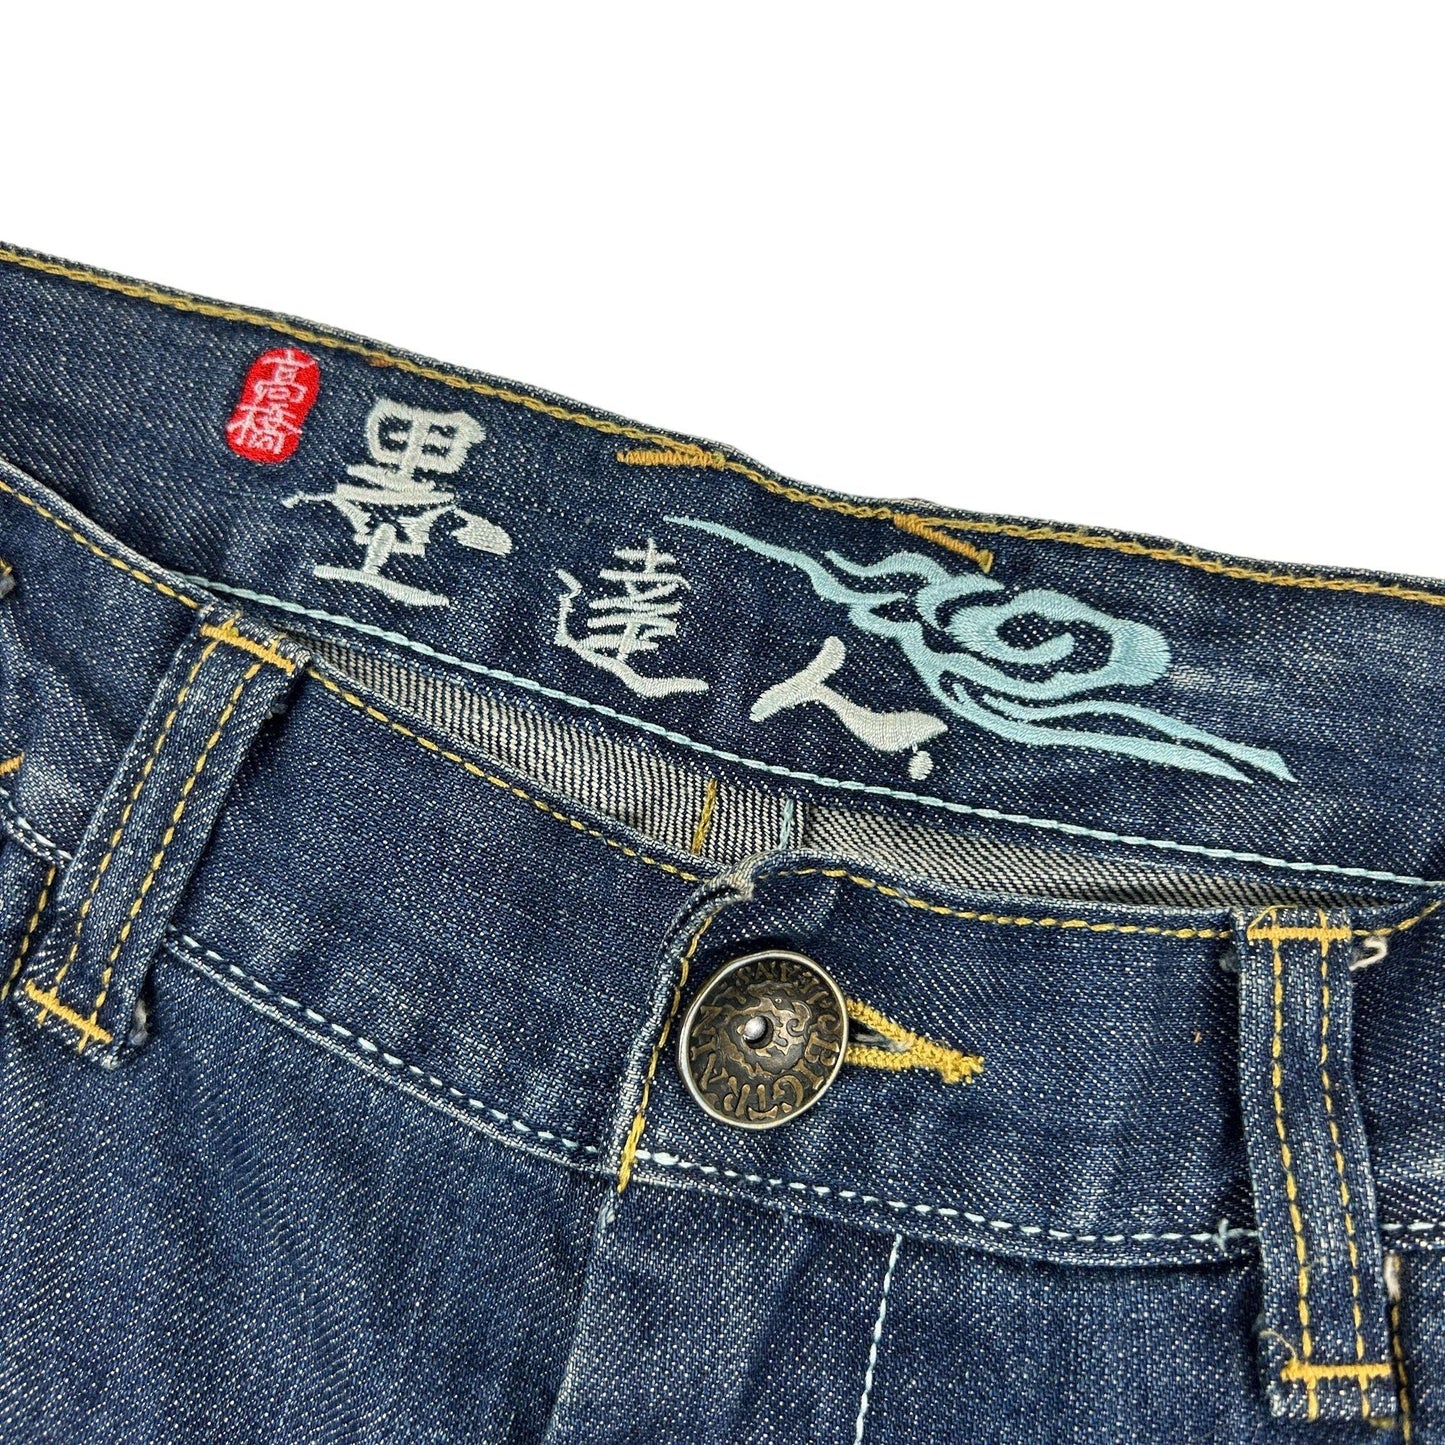 Vintage Flower Big Train Japanese Embroidered Distressed Denim Jeans Size W32 - Known Source